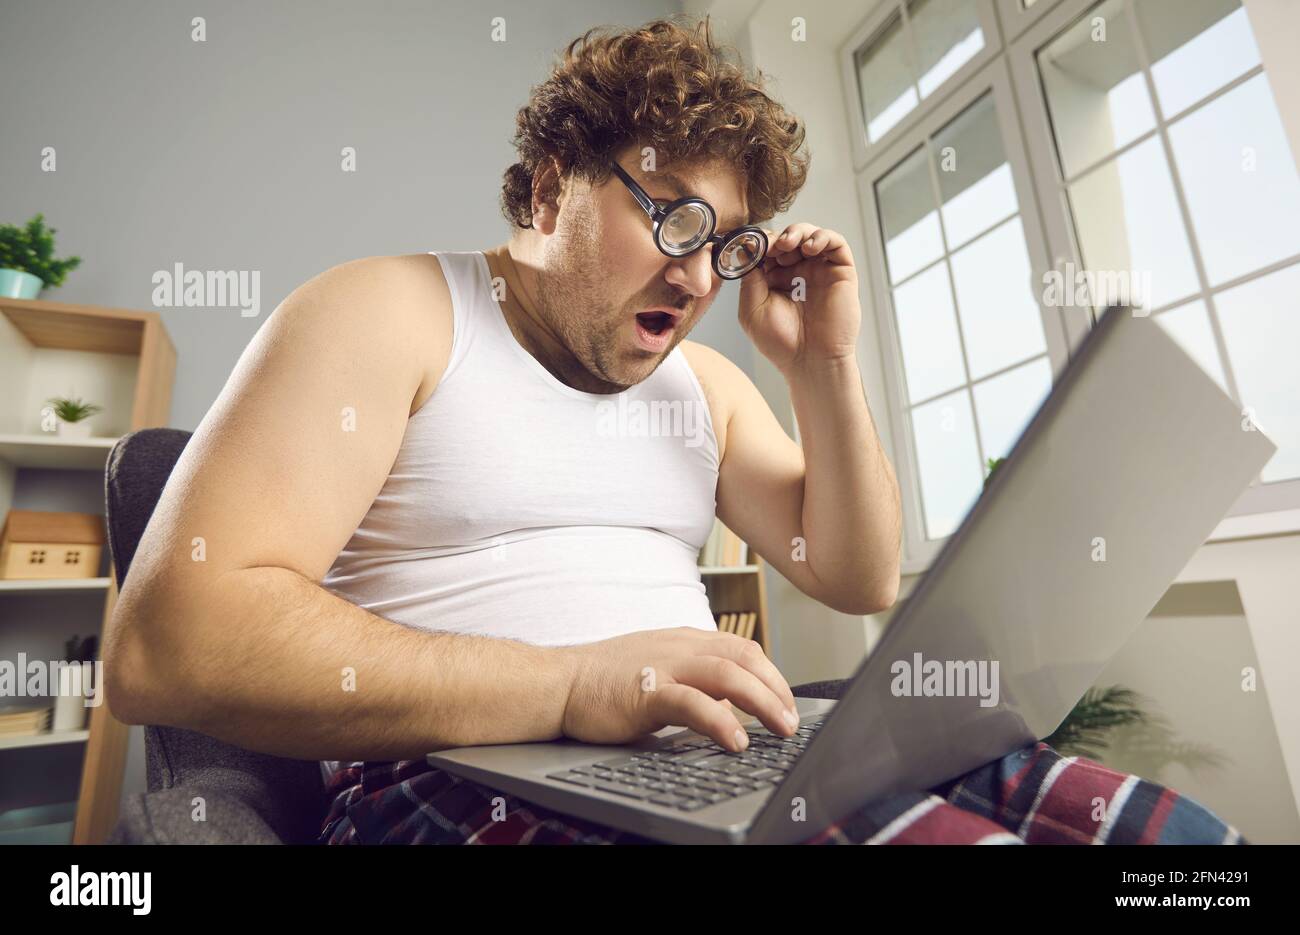 Surprised shocked funny fat man in pajamas reads amazing news on laptop  Stock Photo - Alamy